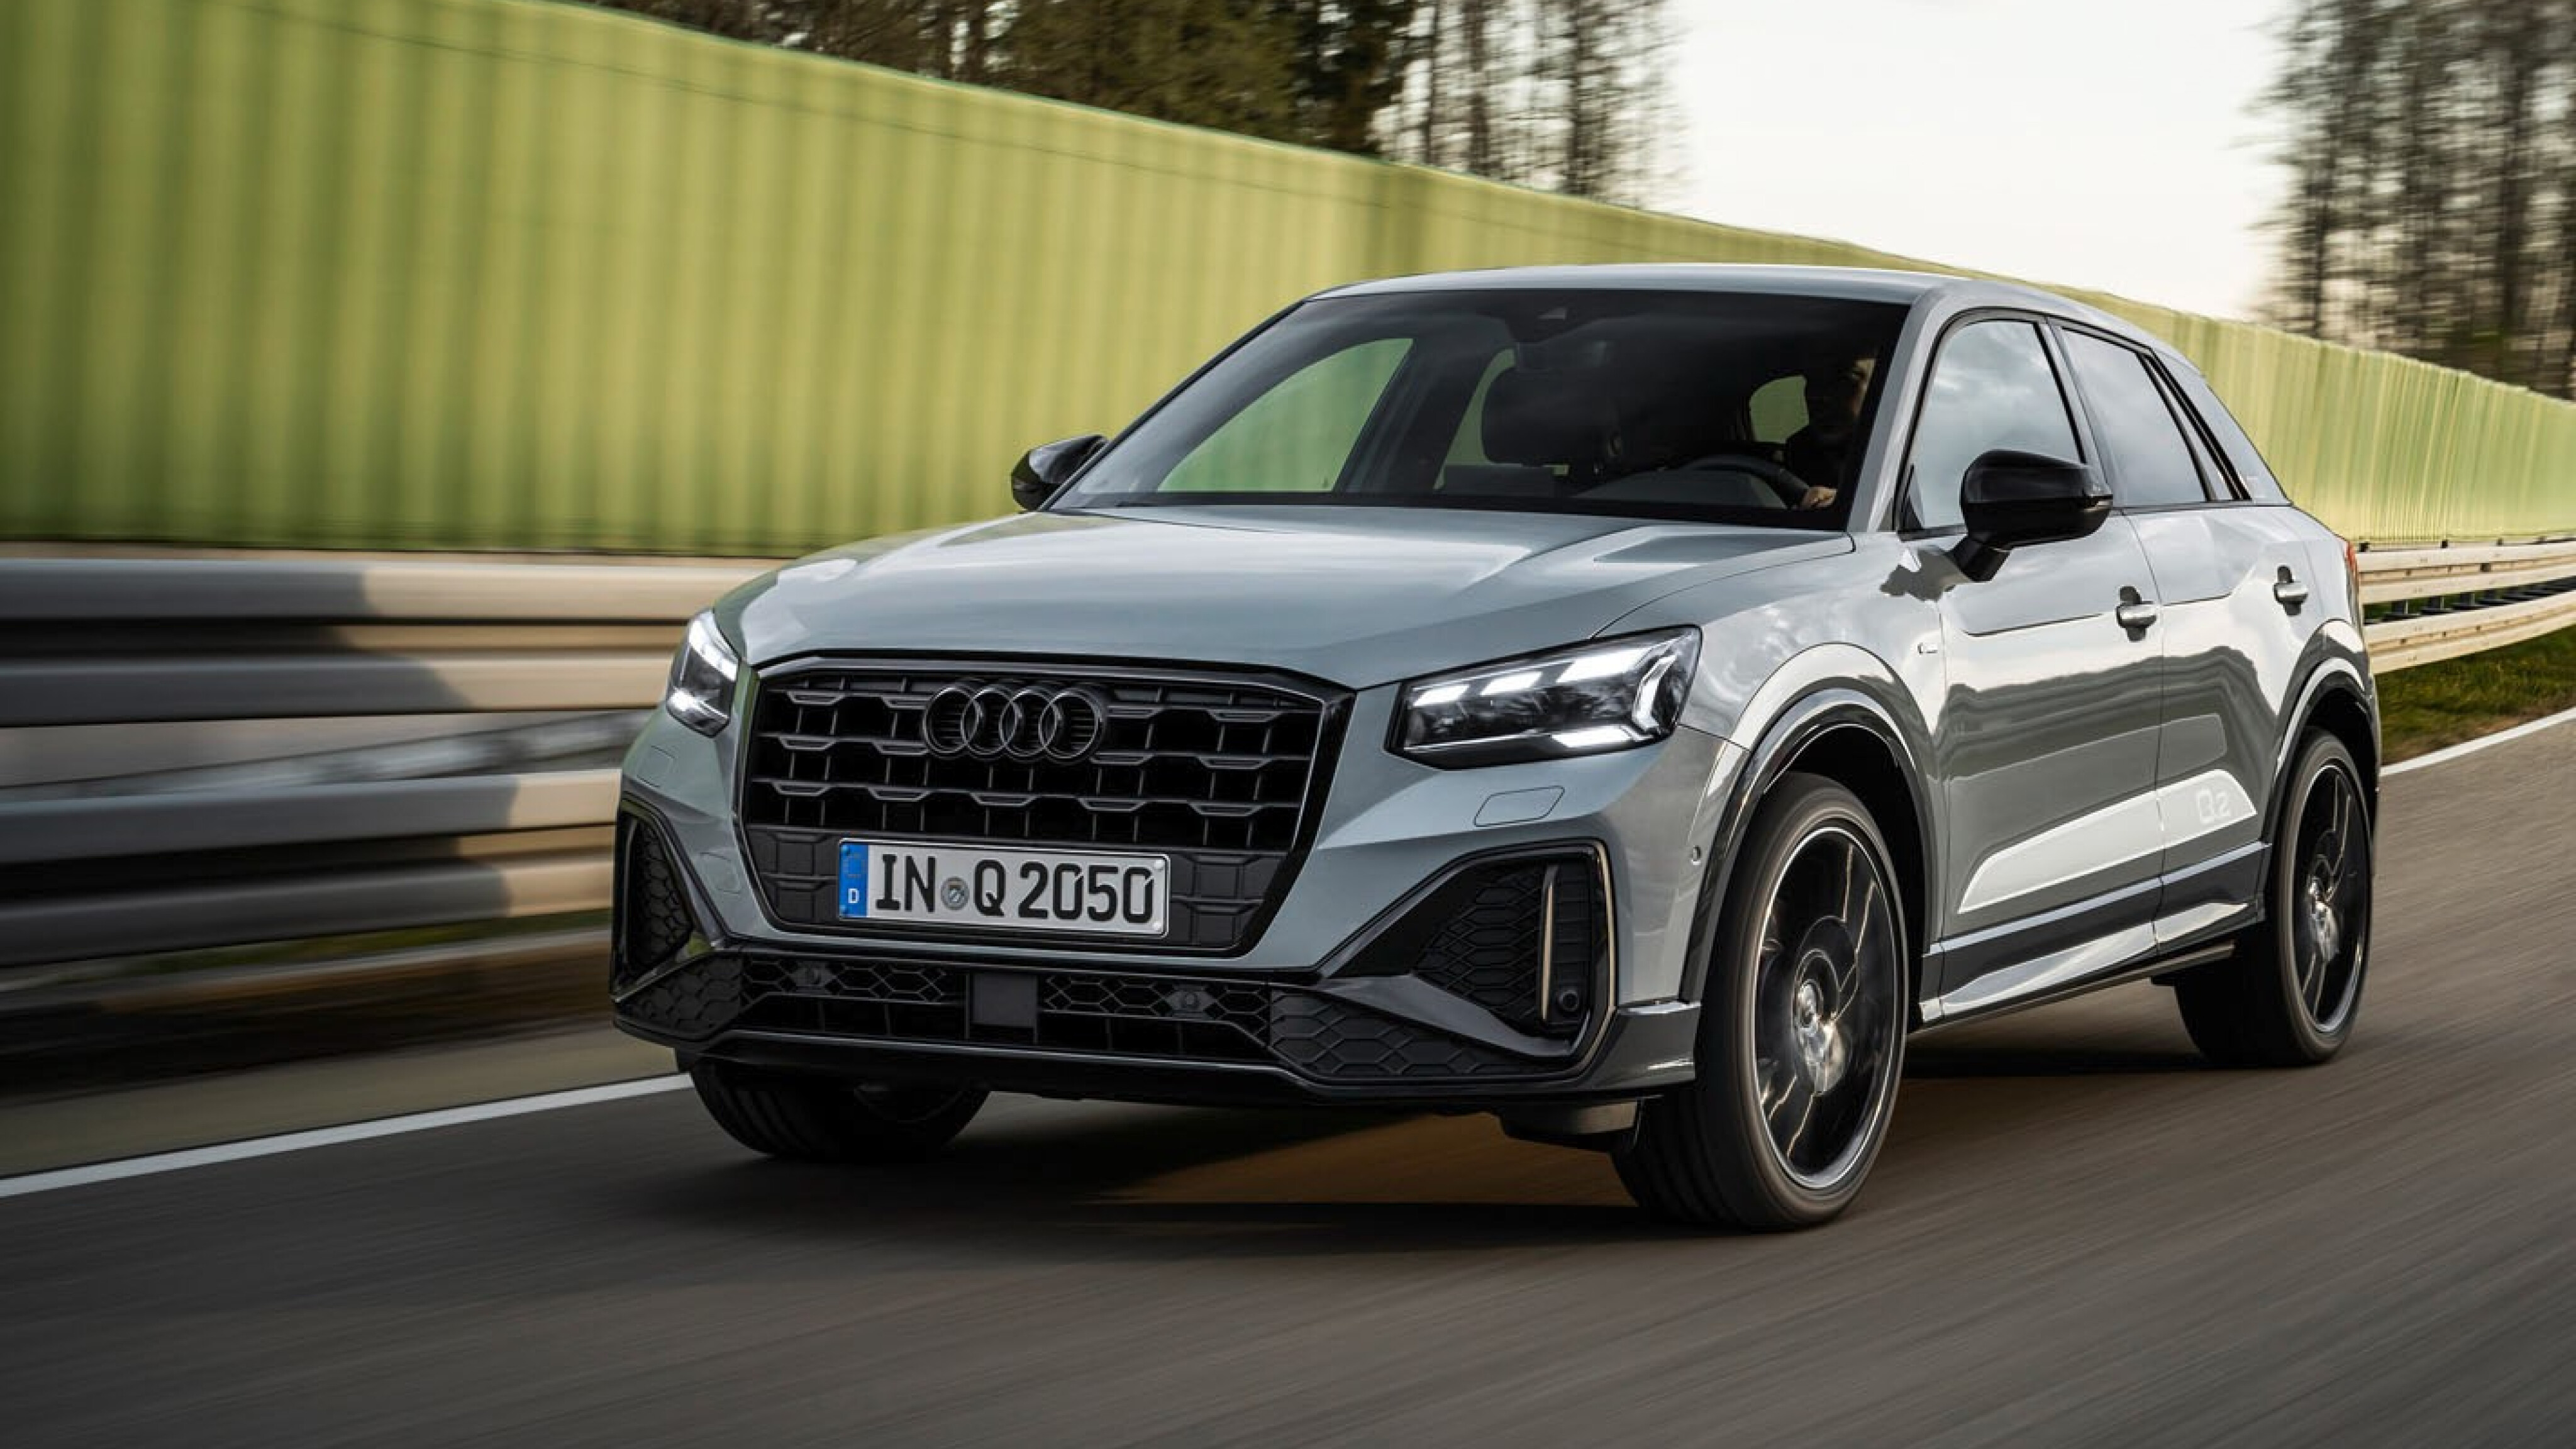 2021 Audi Q2 facelift Australian pricing and features